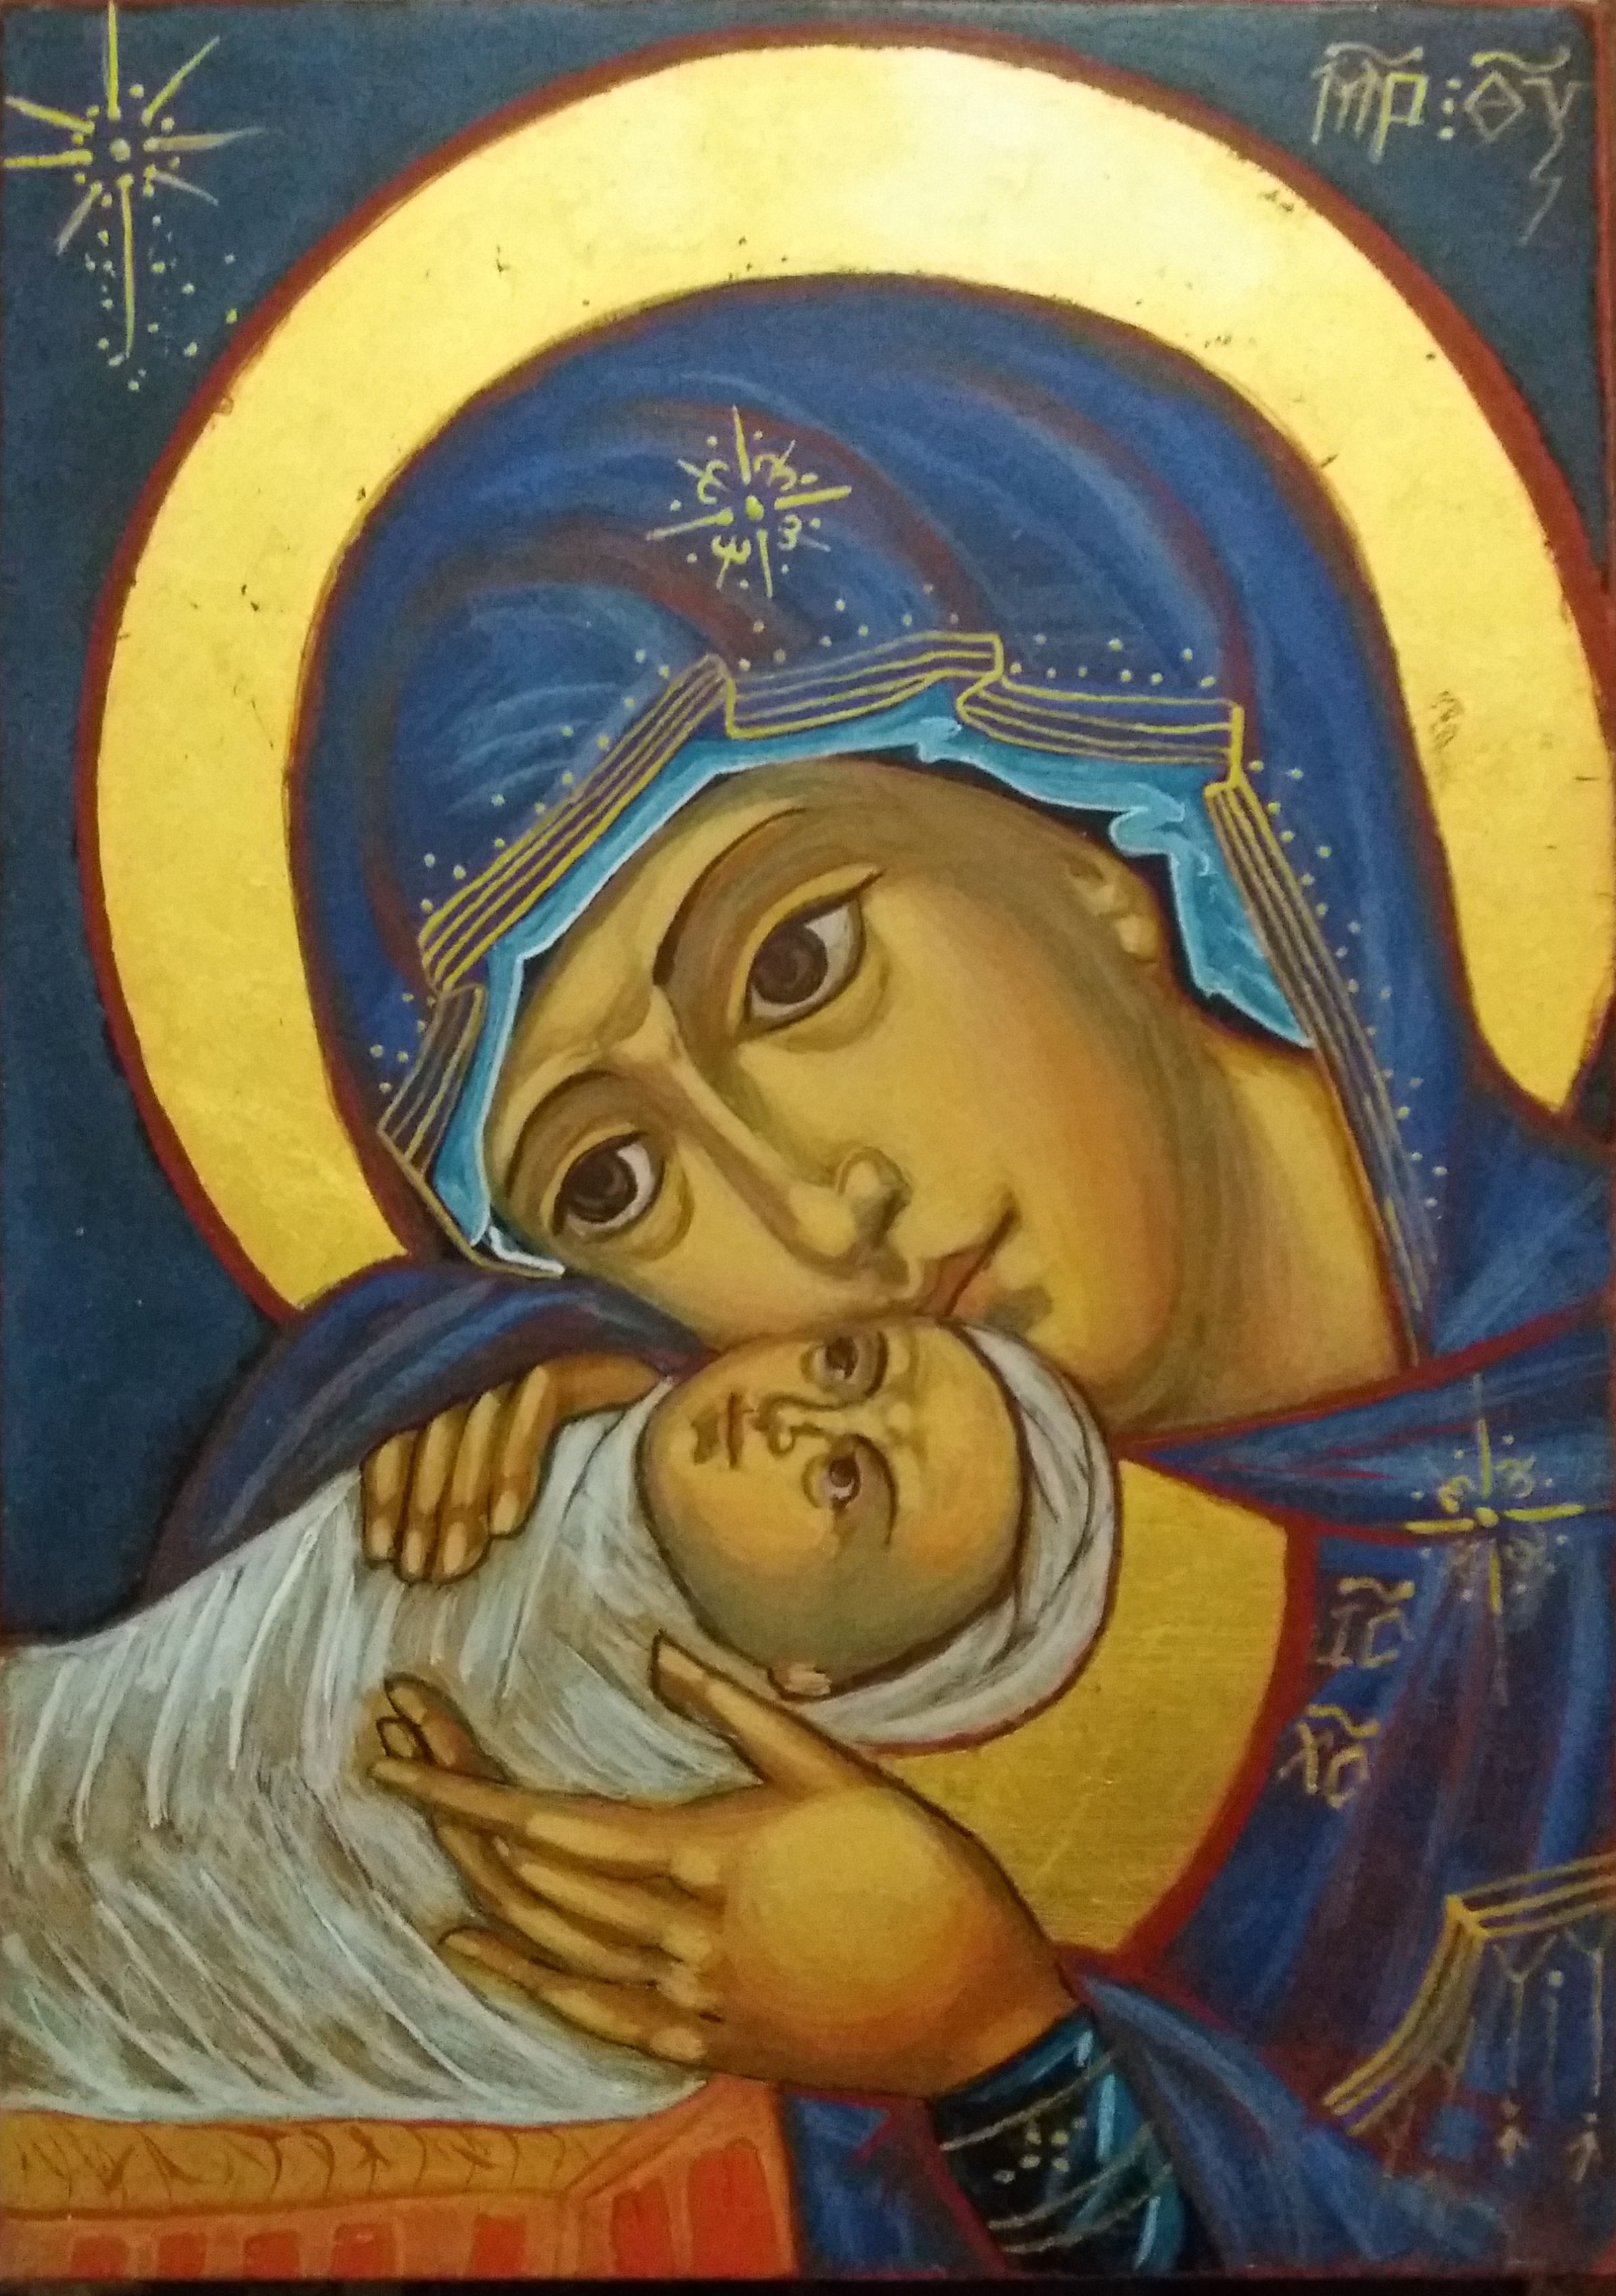 January 1st: Solemnity of Mary, the Mother of God - Benedictine